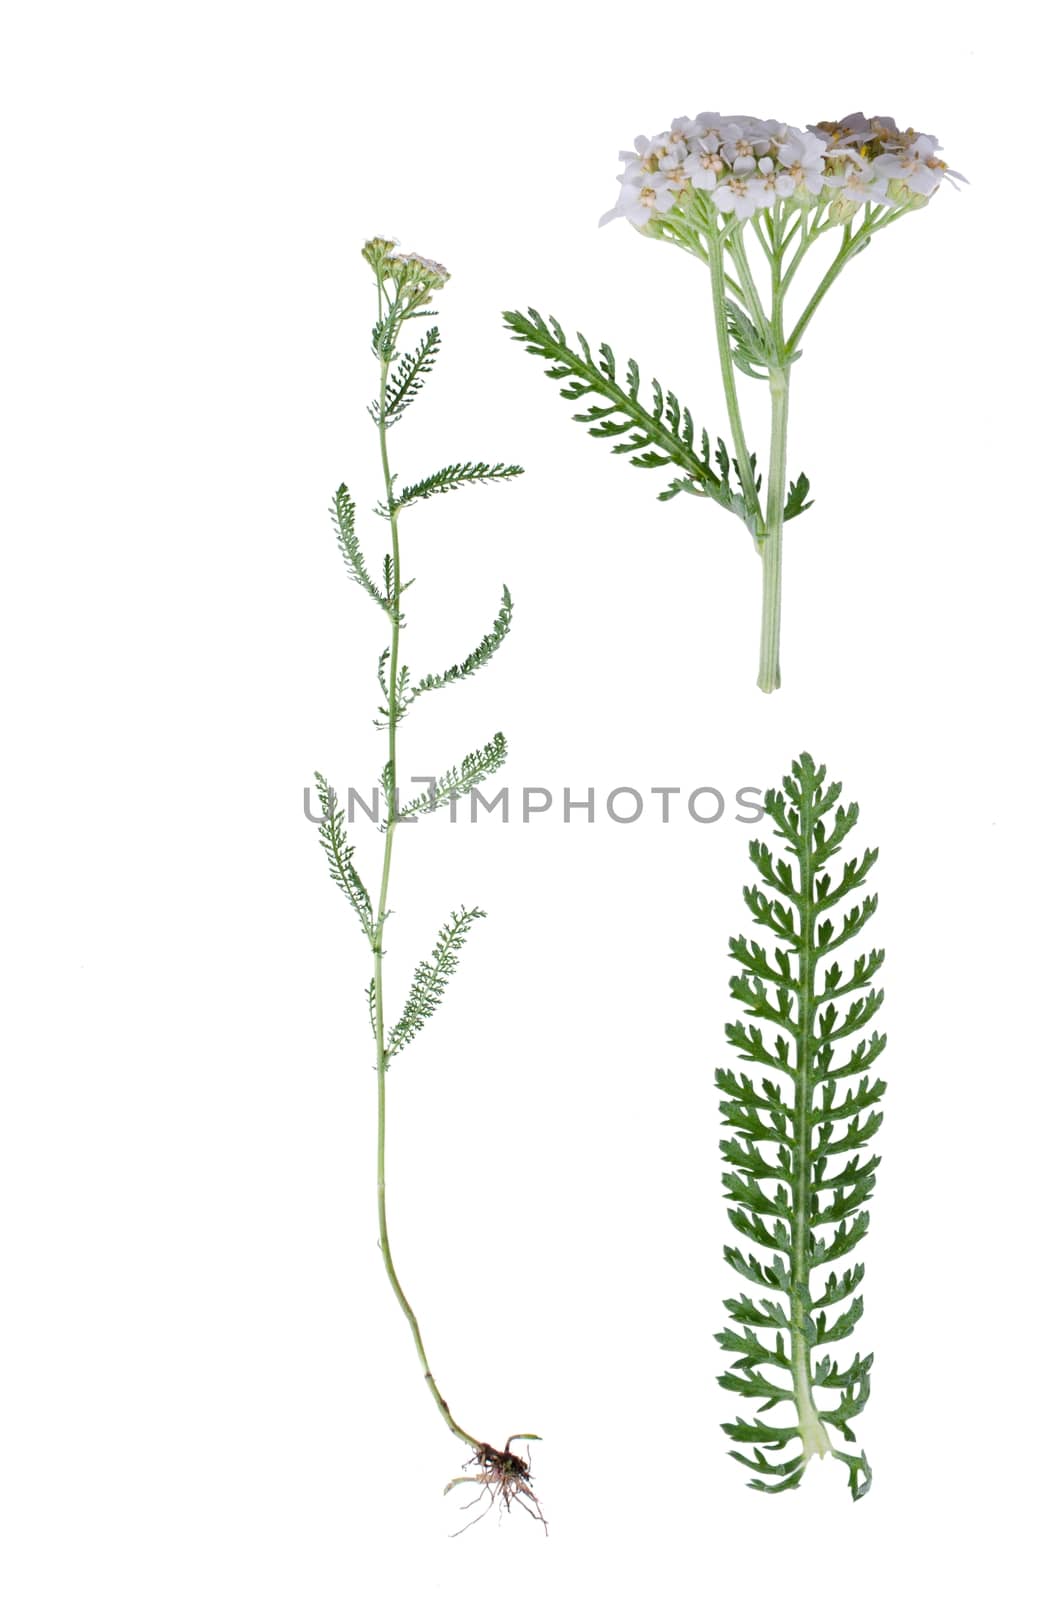 Yarrow flower and details of root, bloom and leaf beside isolated on white background.